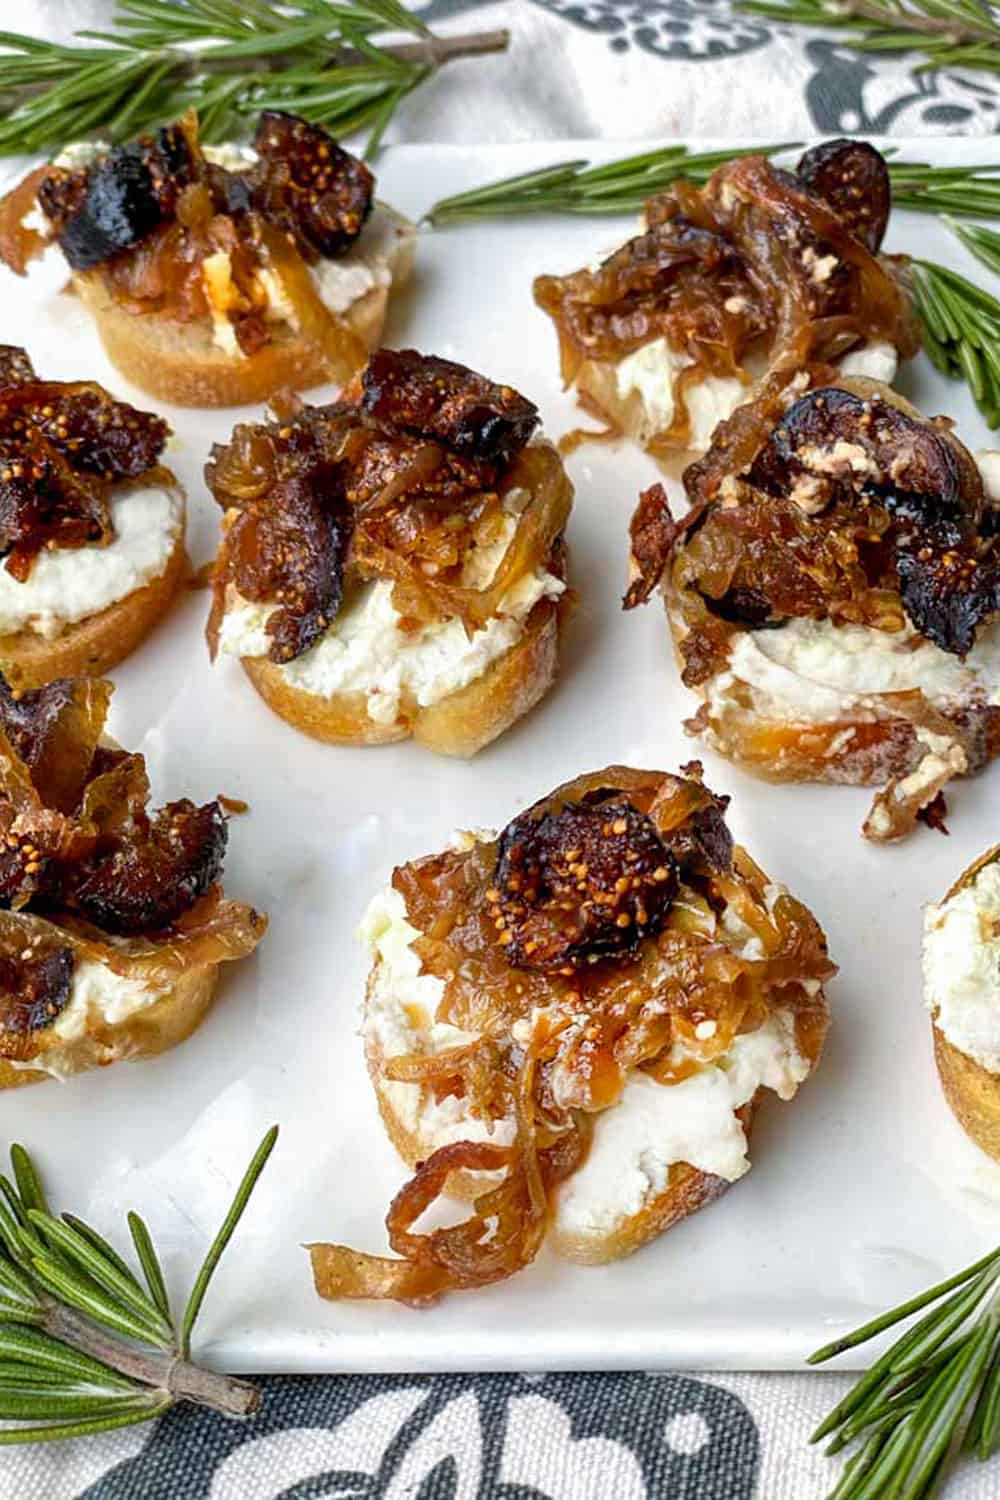 7 baguette slices on a white serving plate topped with goat cheese and caramelized onions mixed with figs, rosemary sprigs for garnish